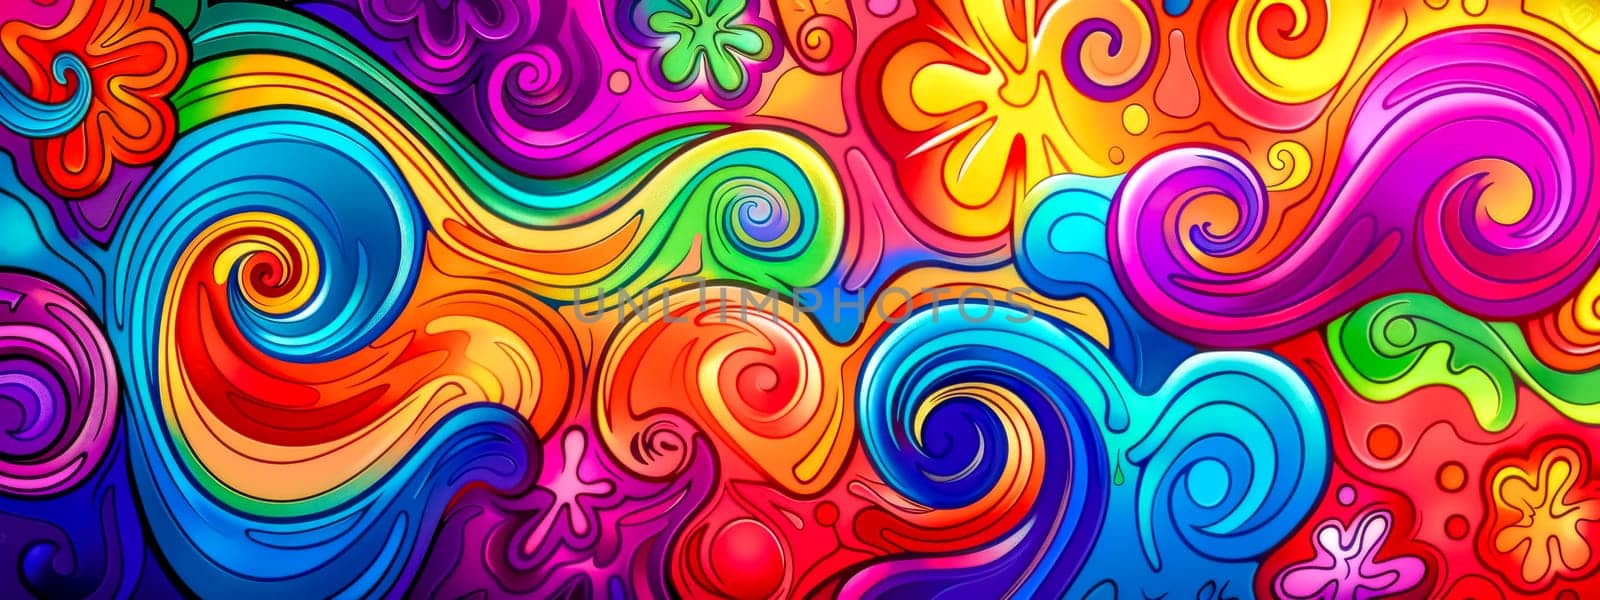 Vibrant and colorful psychedelic swirls abstract background with multicolored patterns and artistic rainbow texture, perfect for wallpaper, retro design, and modern digital art illustration